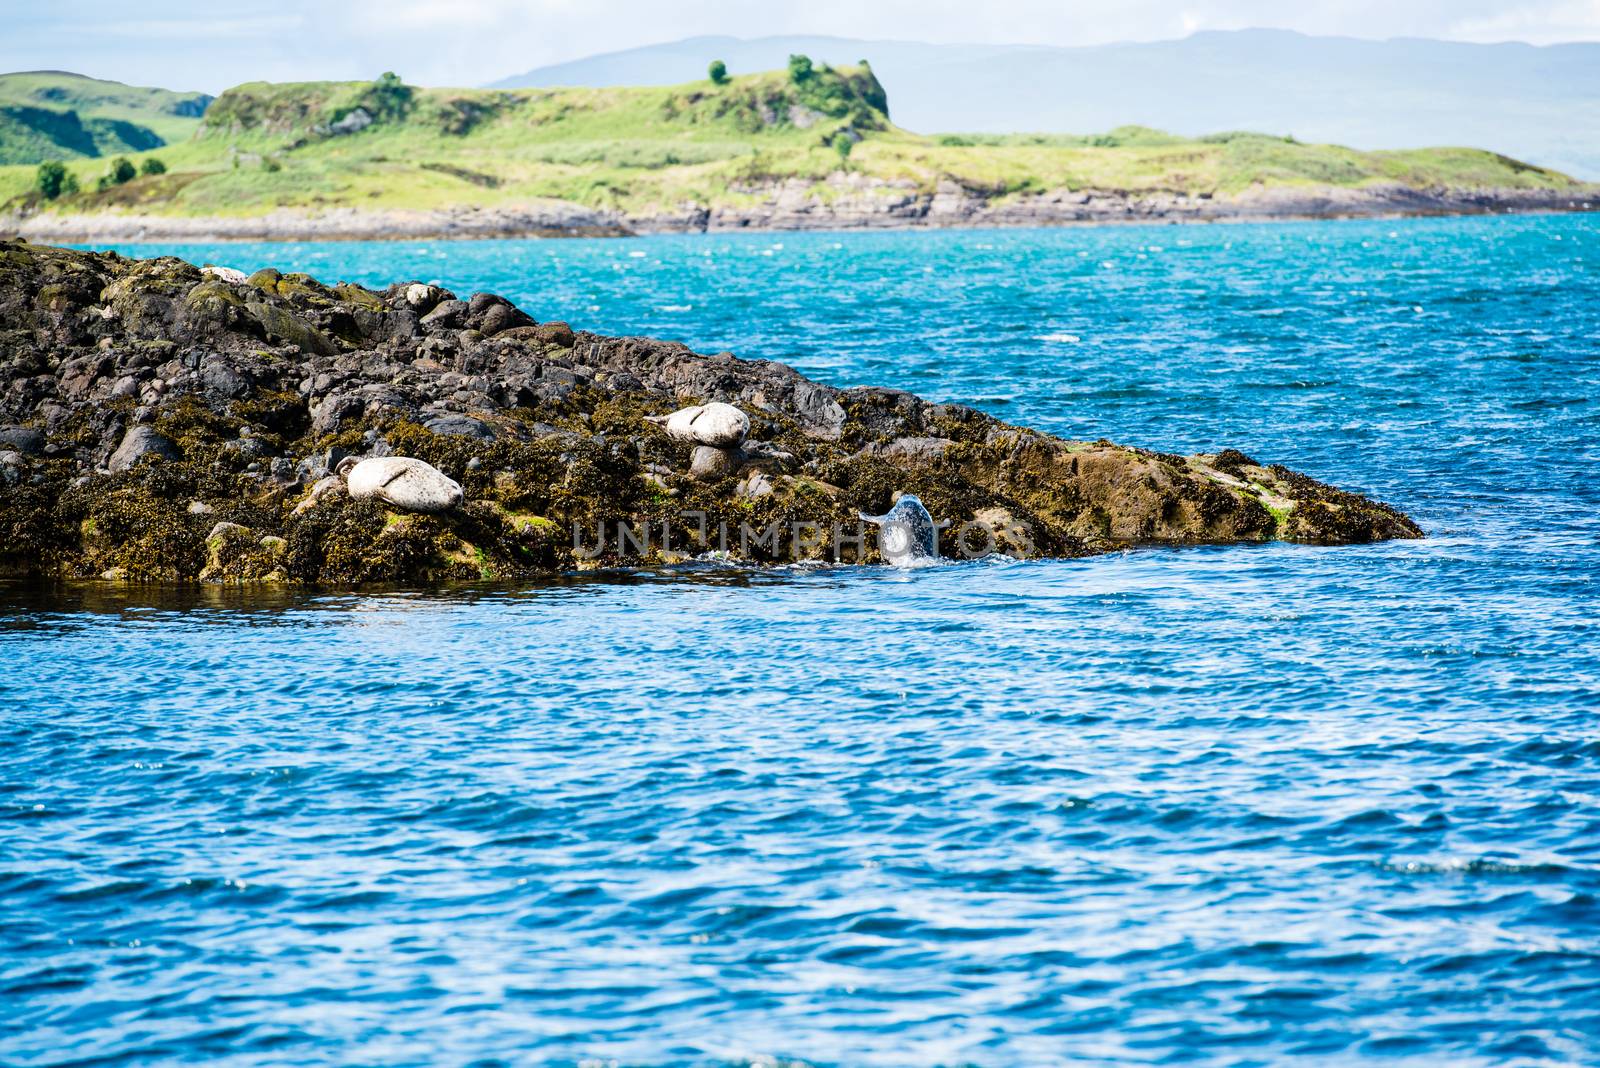 A sea lion or seal is leaving the water and joining his comrades sunning themselves on the rocks of a small island near Oban,Scotland